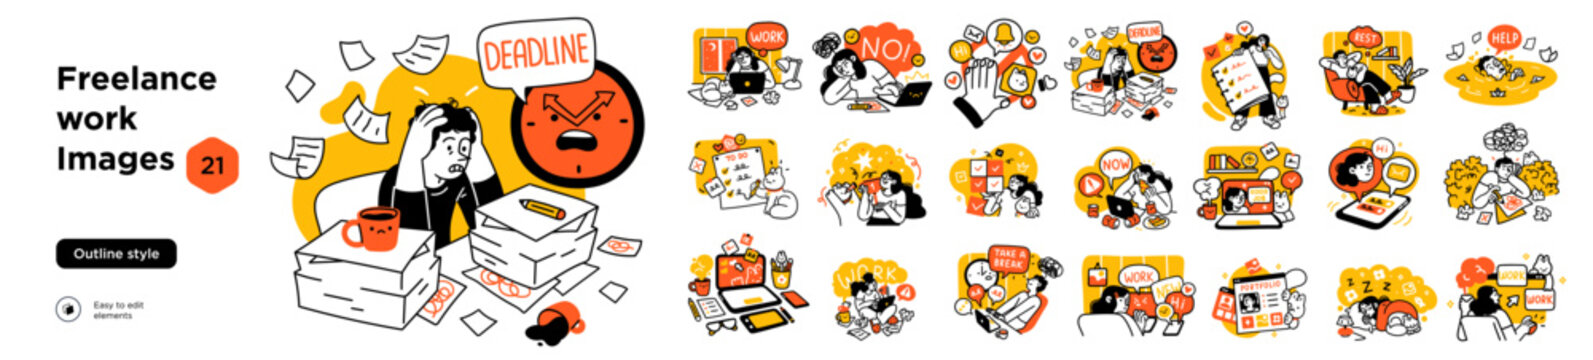 Remote Work Benefits, Limitations and Workflow Organization Concept illustrations. Collection of scenes with people organizing and improving their workflow. Vector illustration